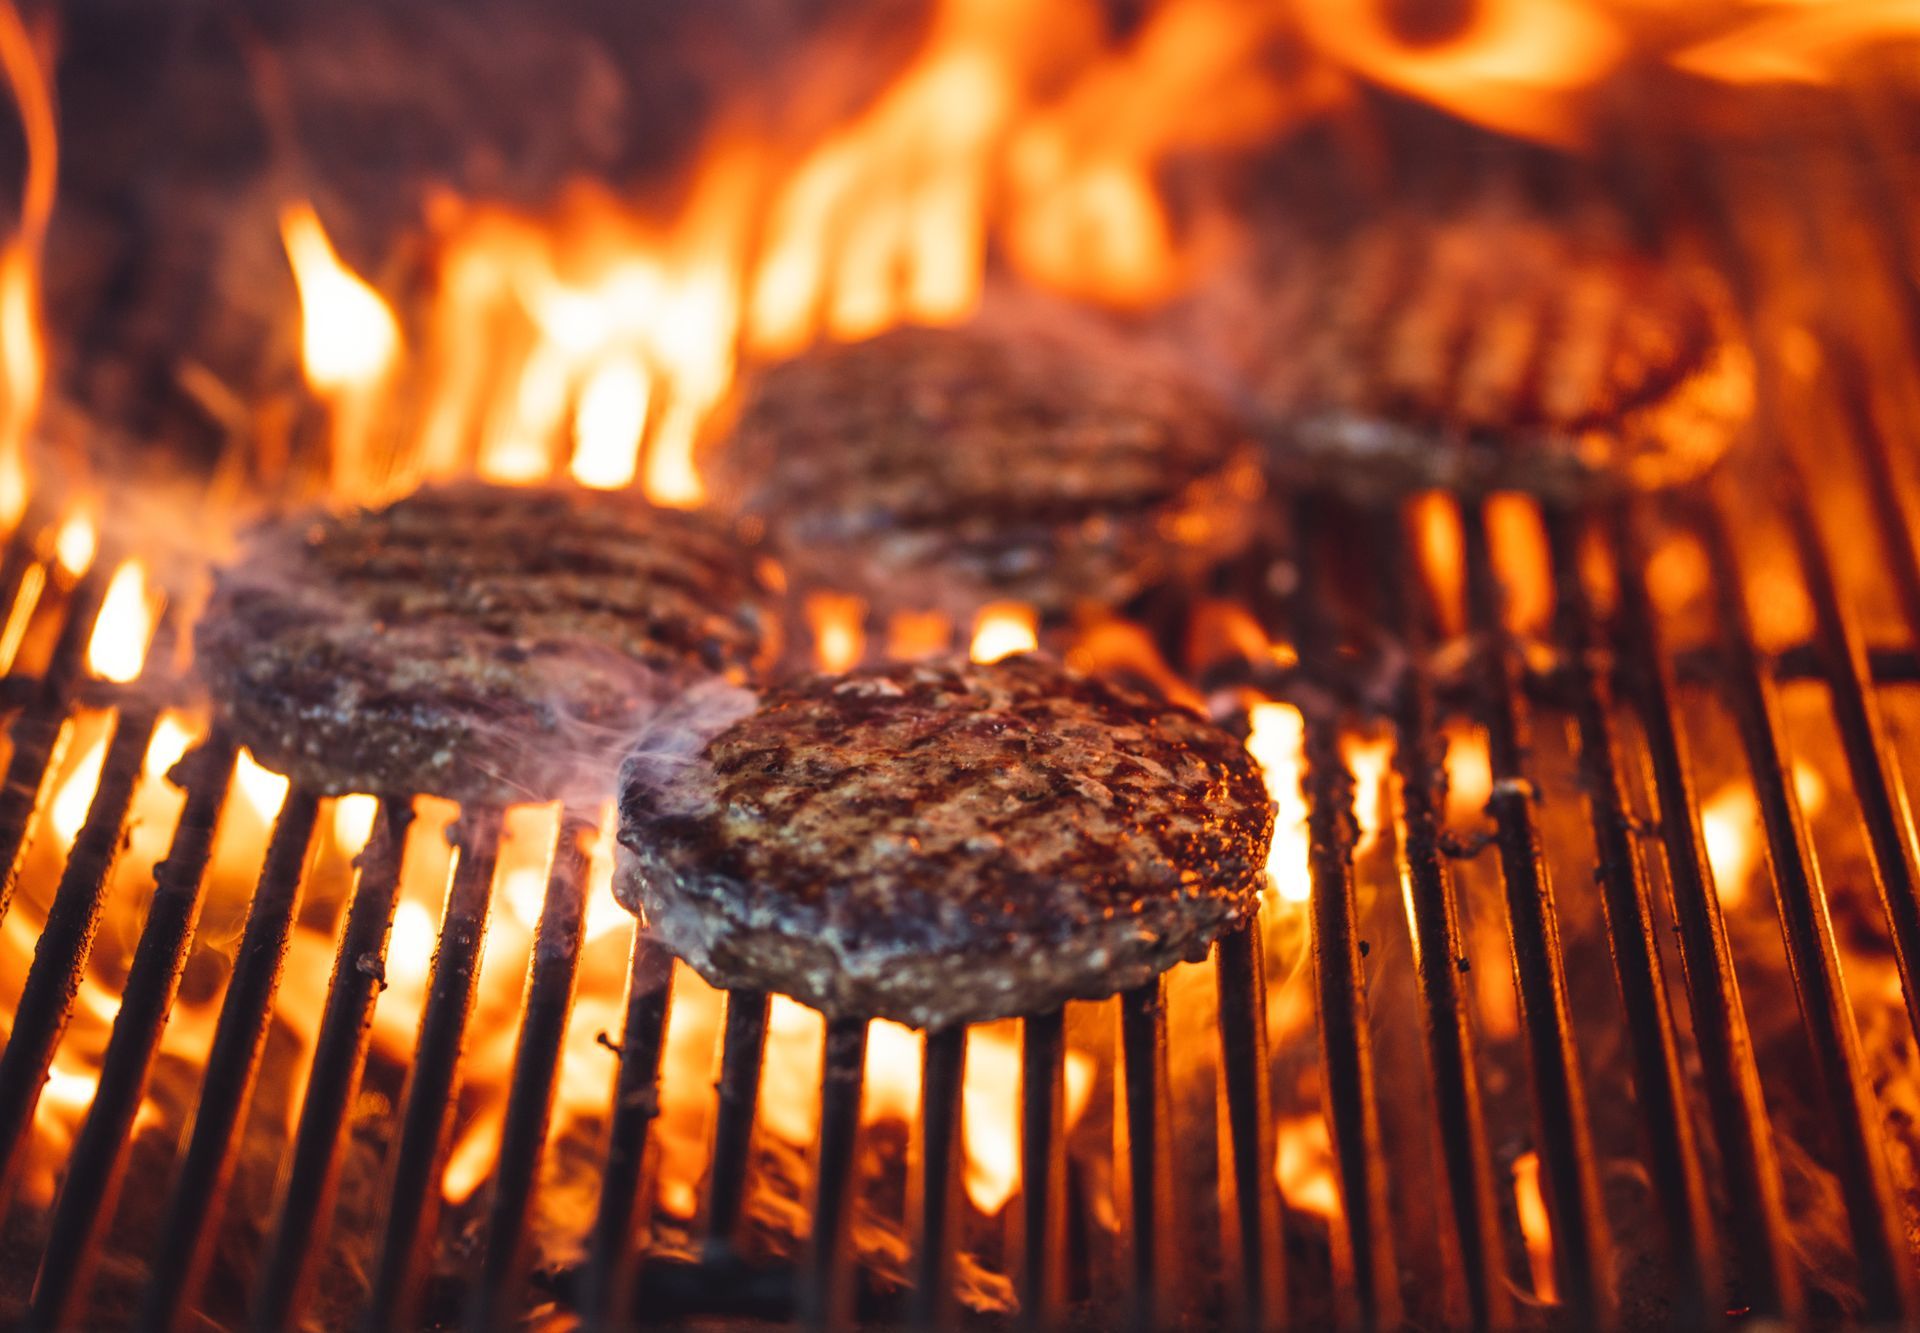 Burgers being flame grilled on a BBQ.